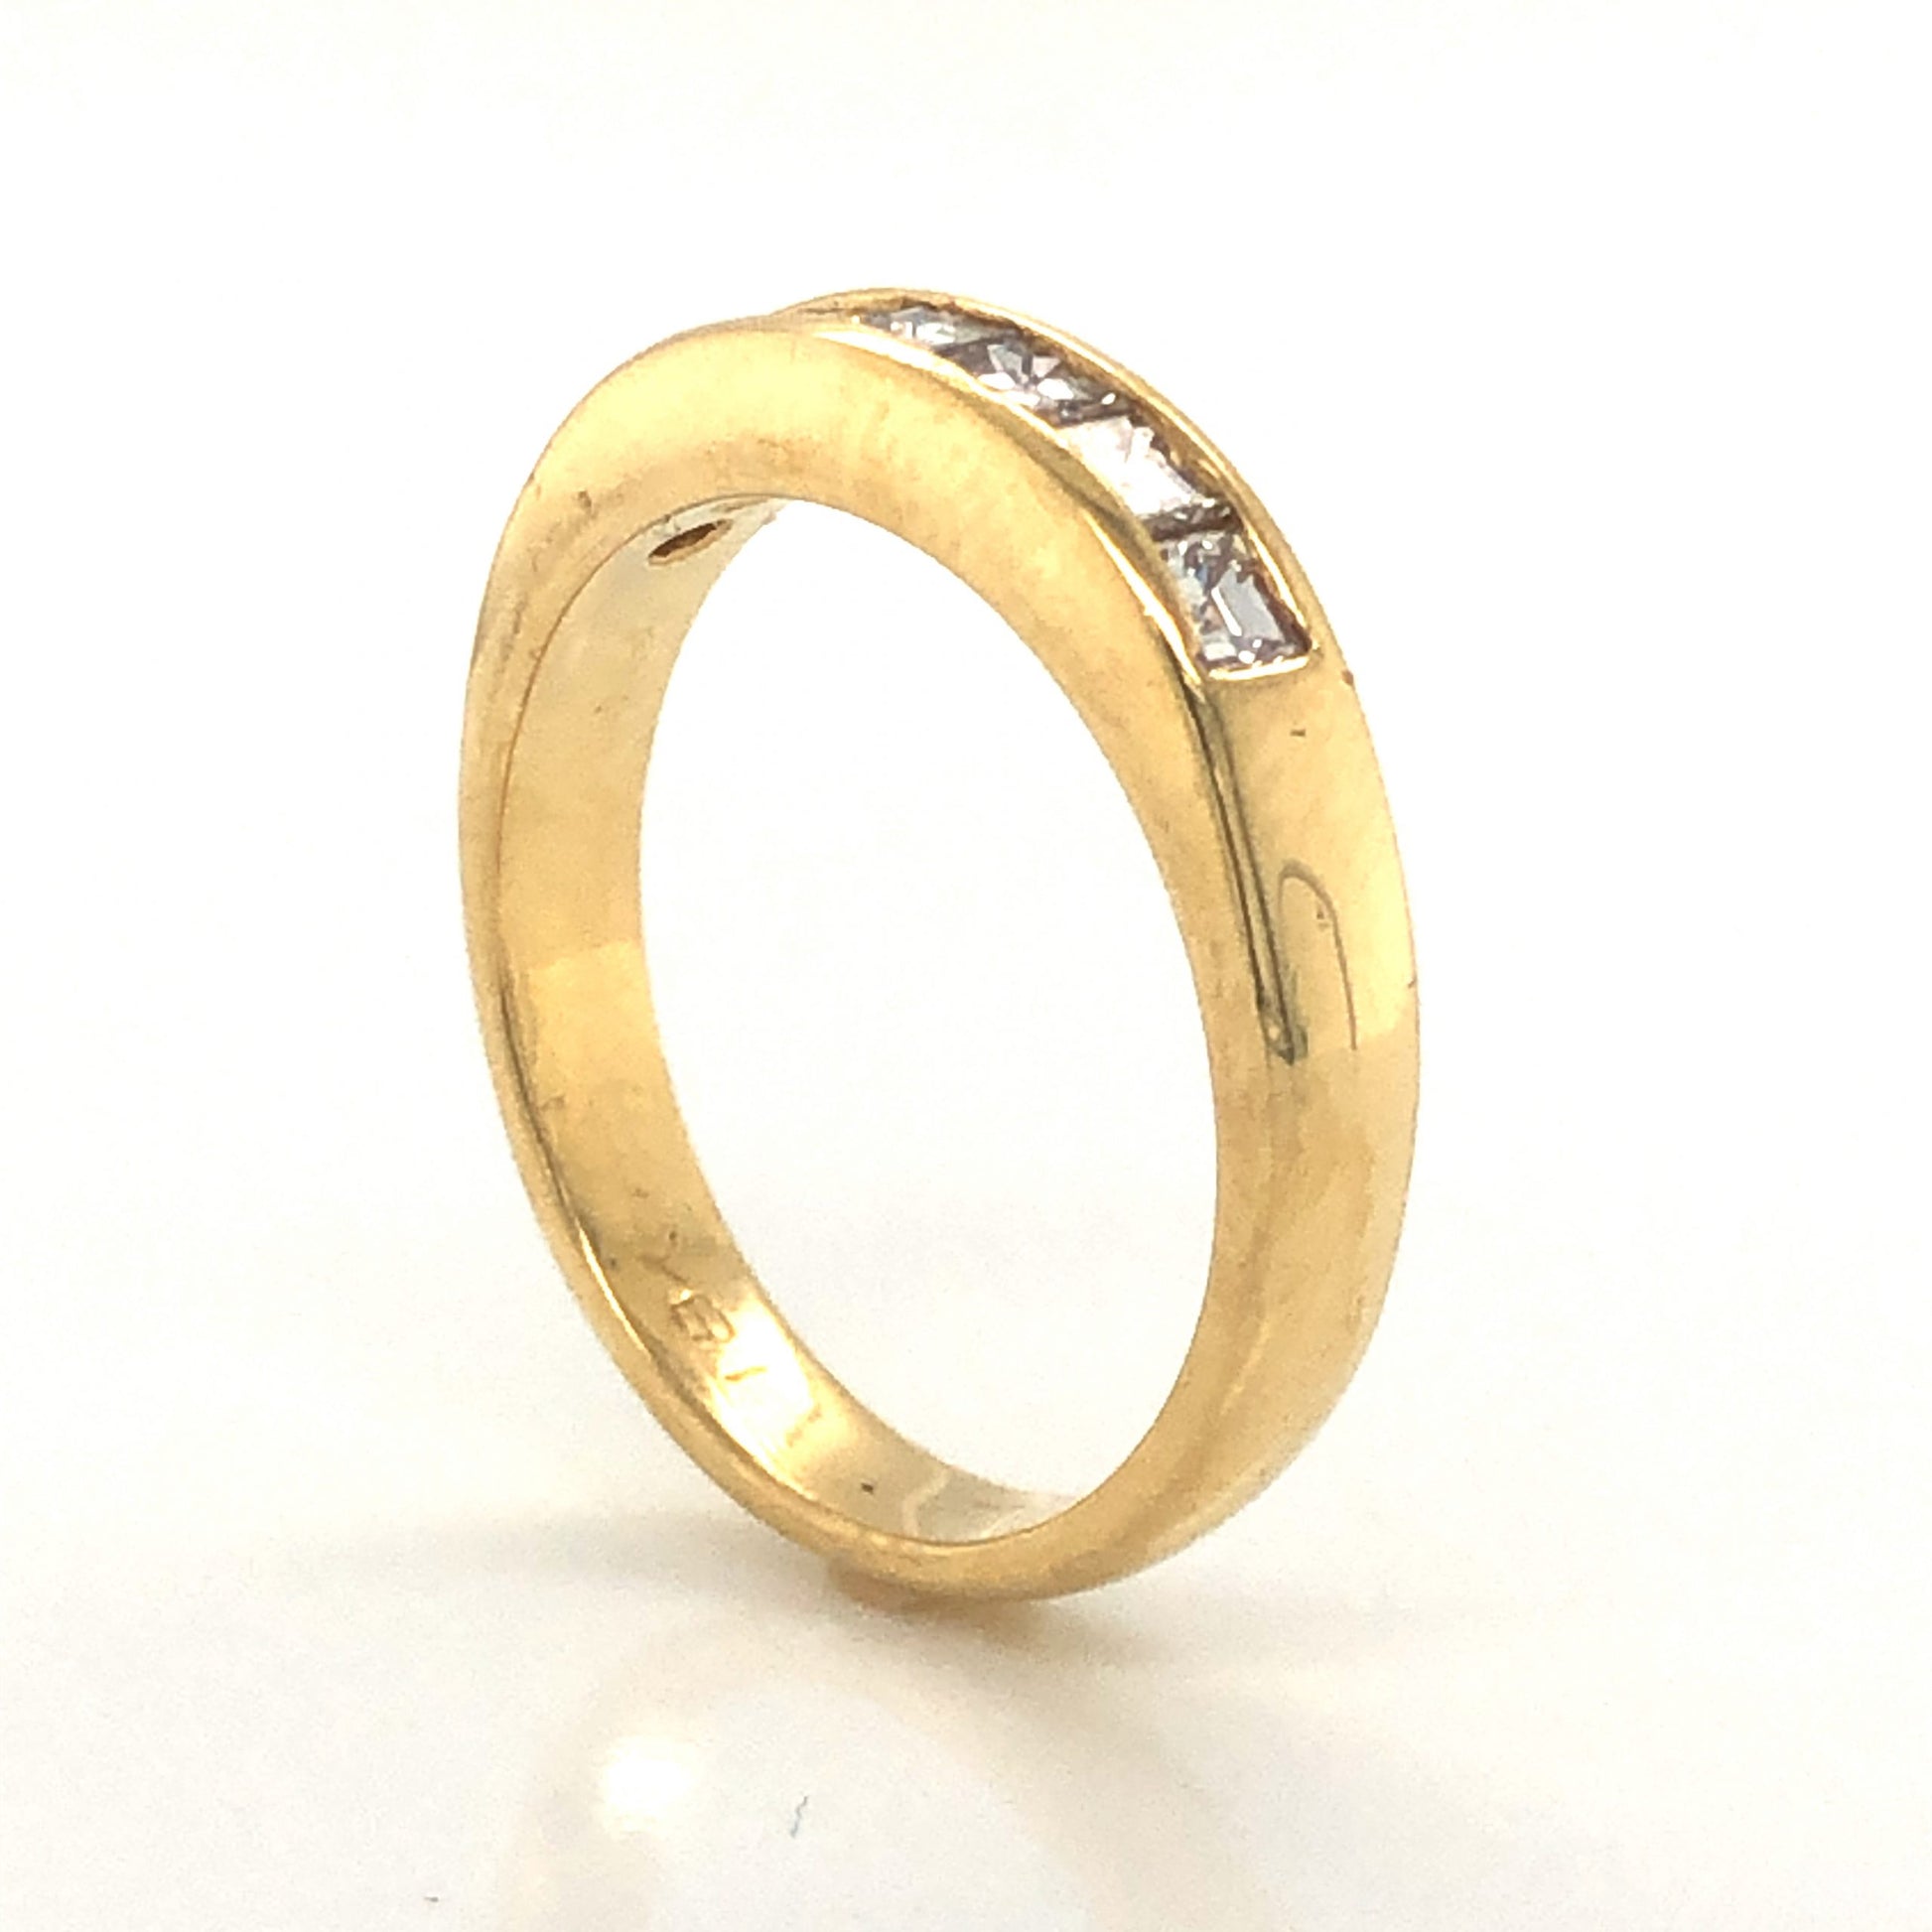 Square Step Cut Diamond Wedding Band in 18k Yellow GoldComposition: PlatinumRing Size: 5.5Total Diamond Weight: .63 ctTotal Gram Weight: 4.0 gInscription: 18k 